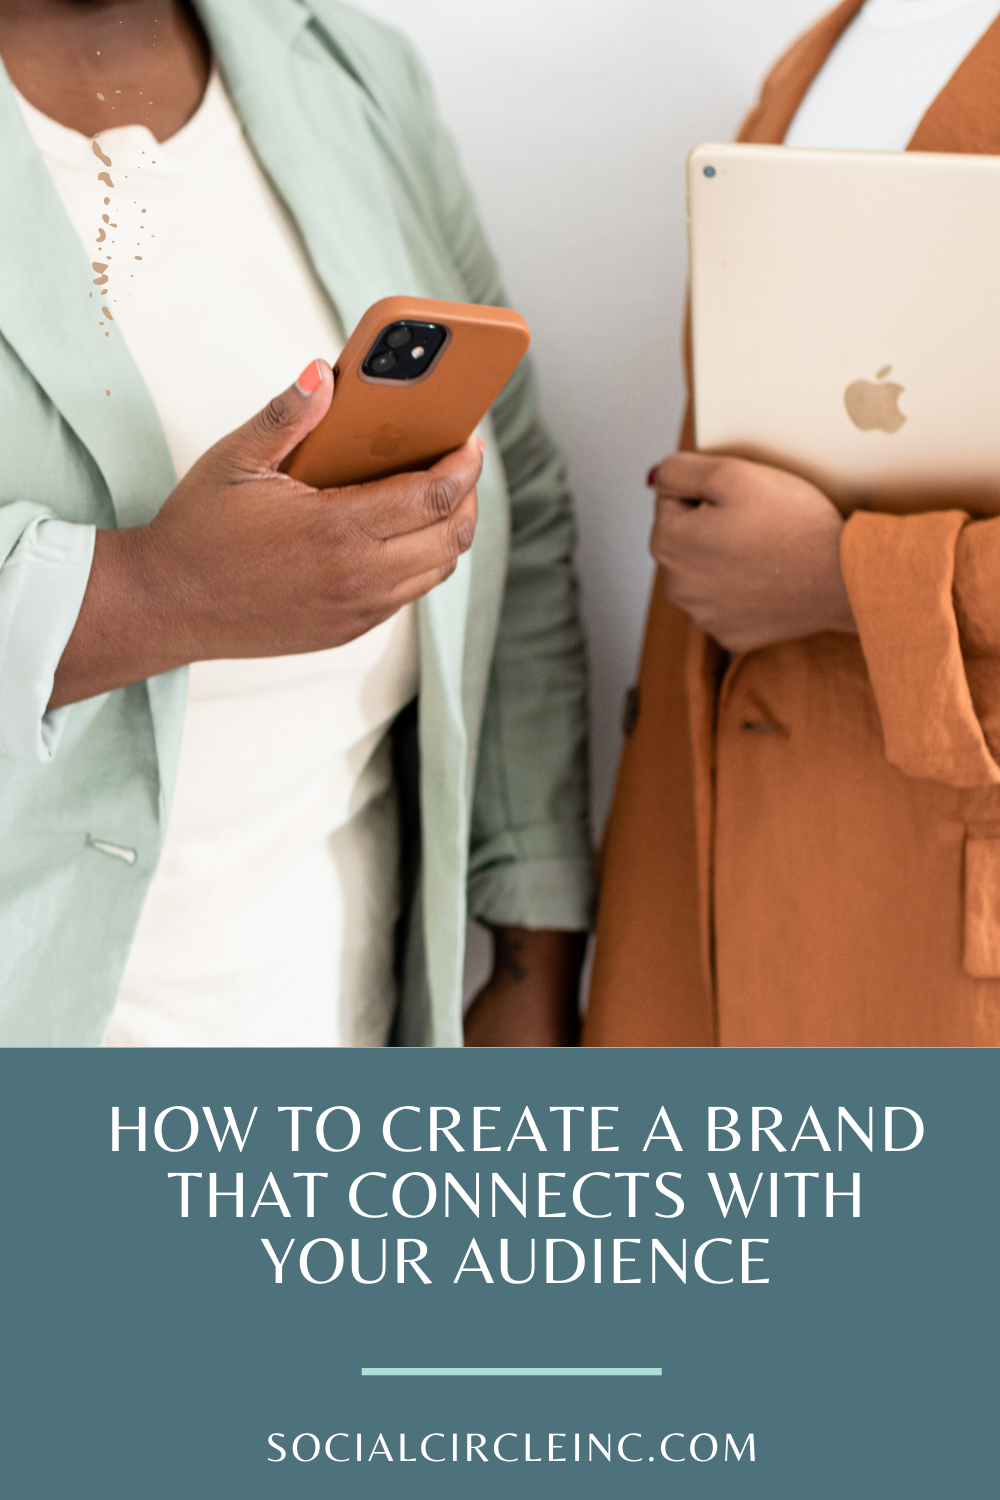 How to Create a Brand that Connects with Your Audience 1